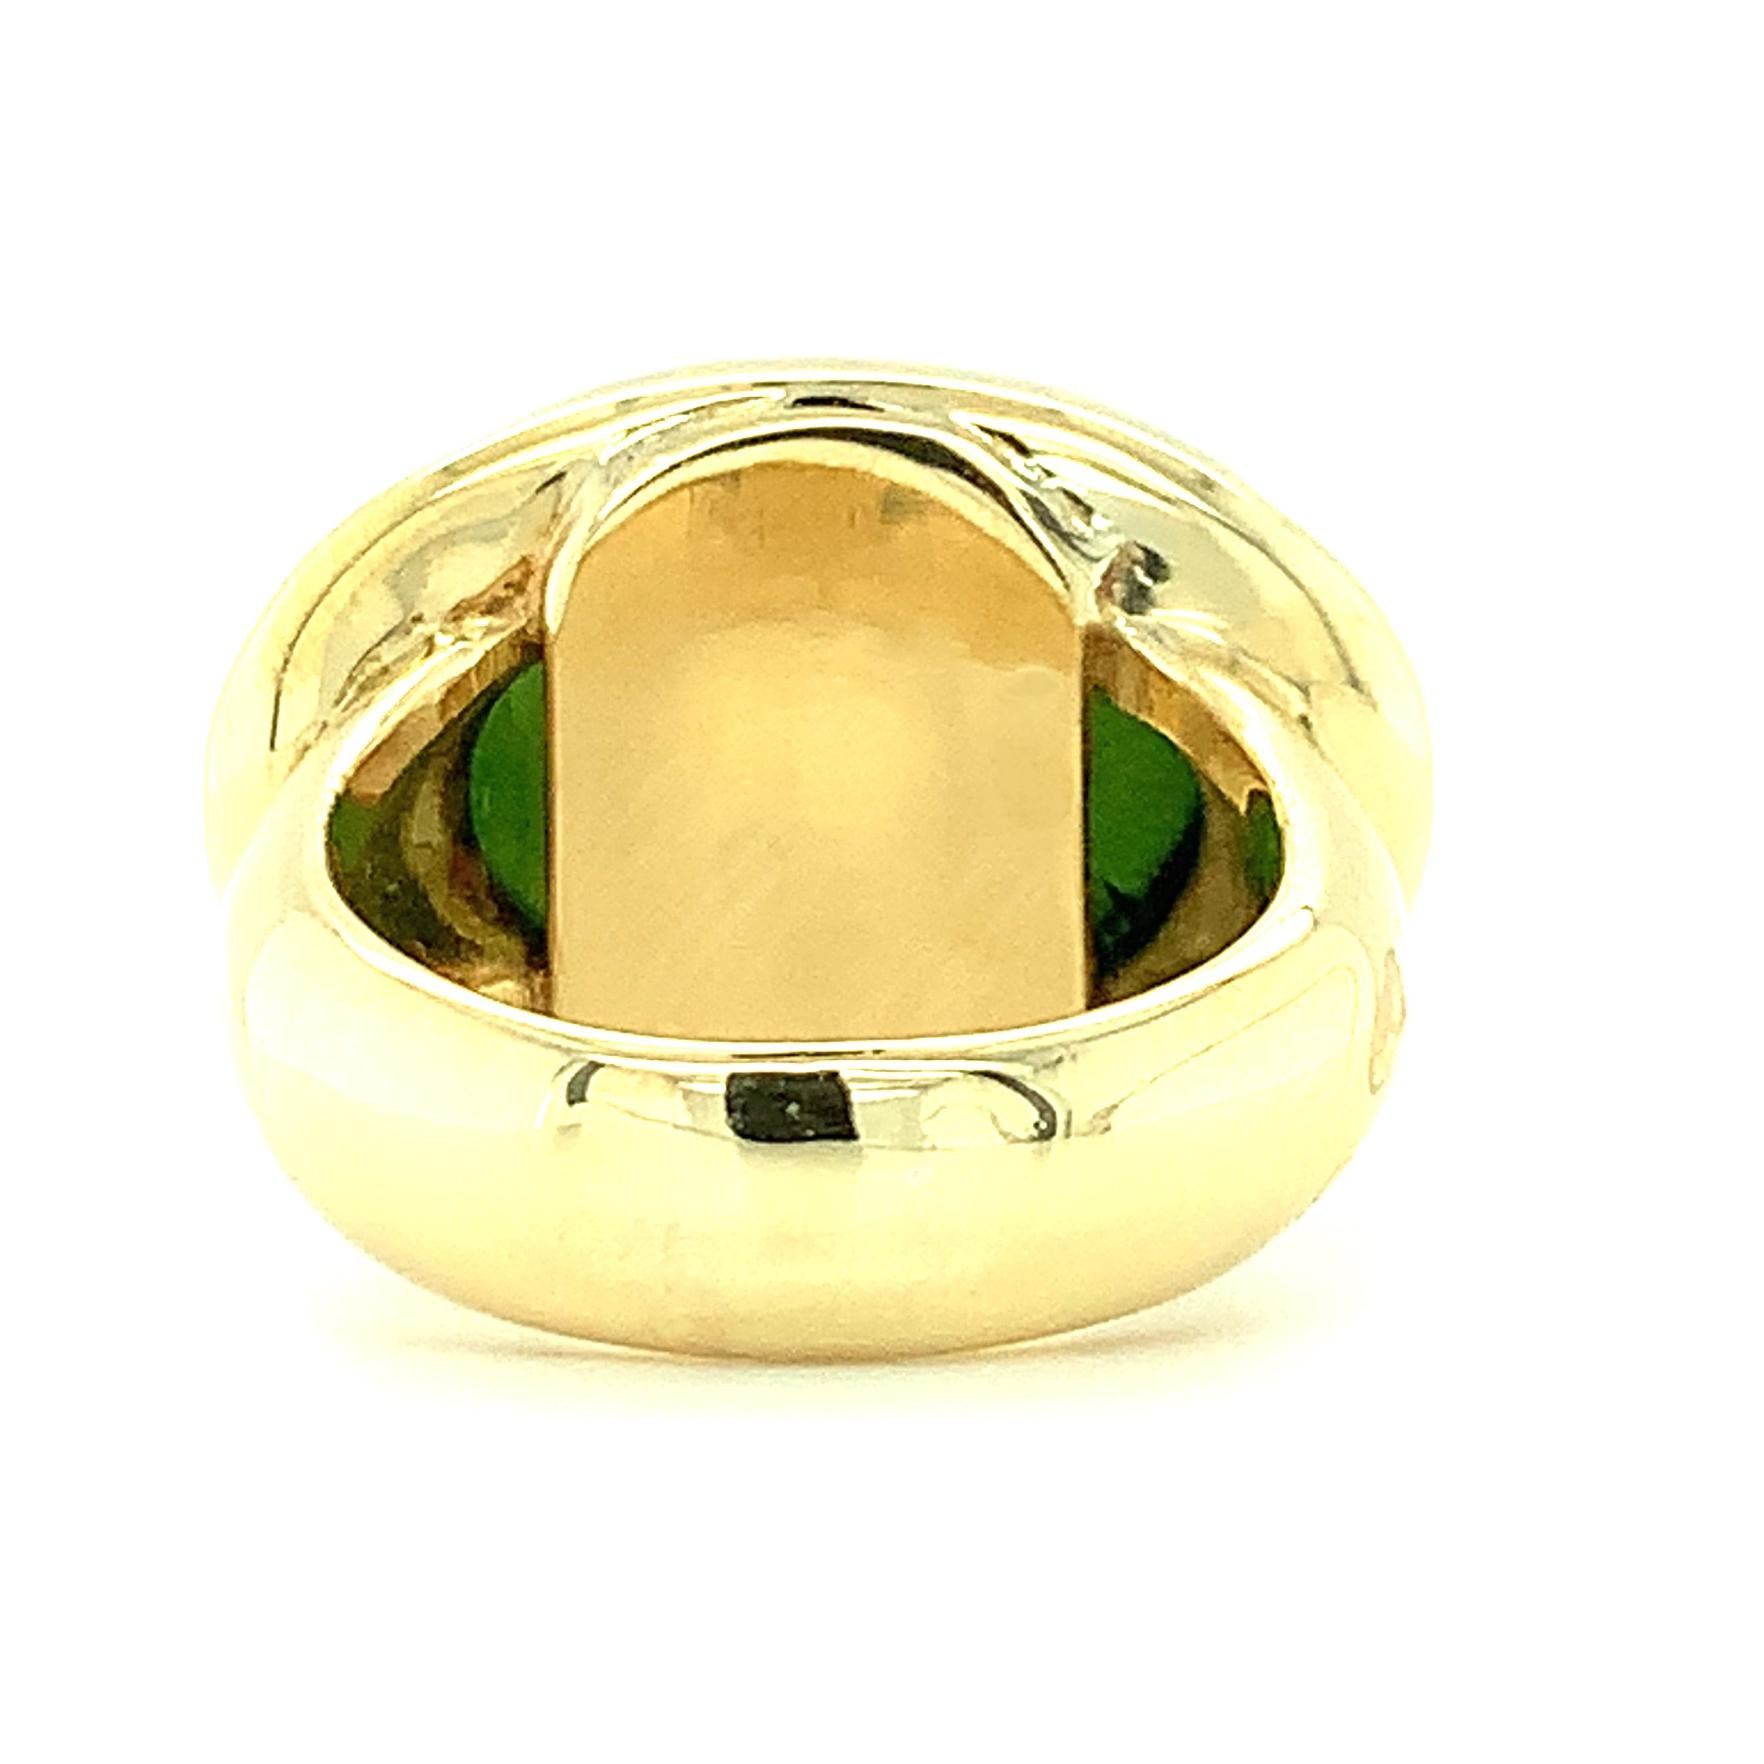 Green Tourmaline Cabochon and 18k Yellow Gold Bezel Ring,  21.40 Carats  For Sale 2